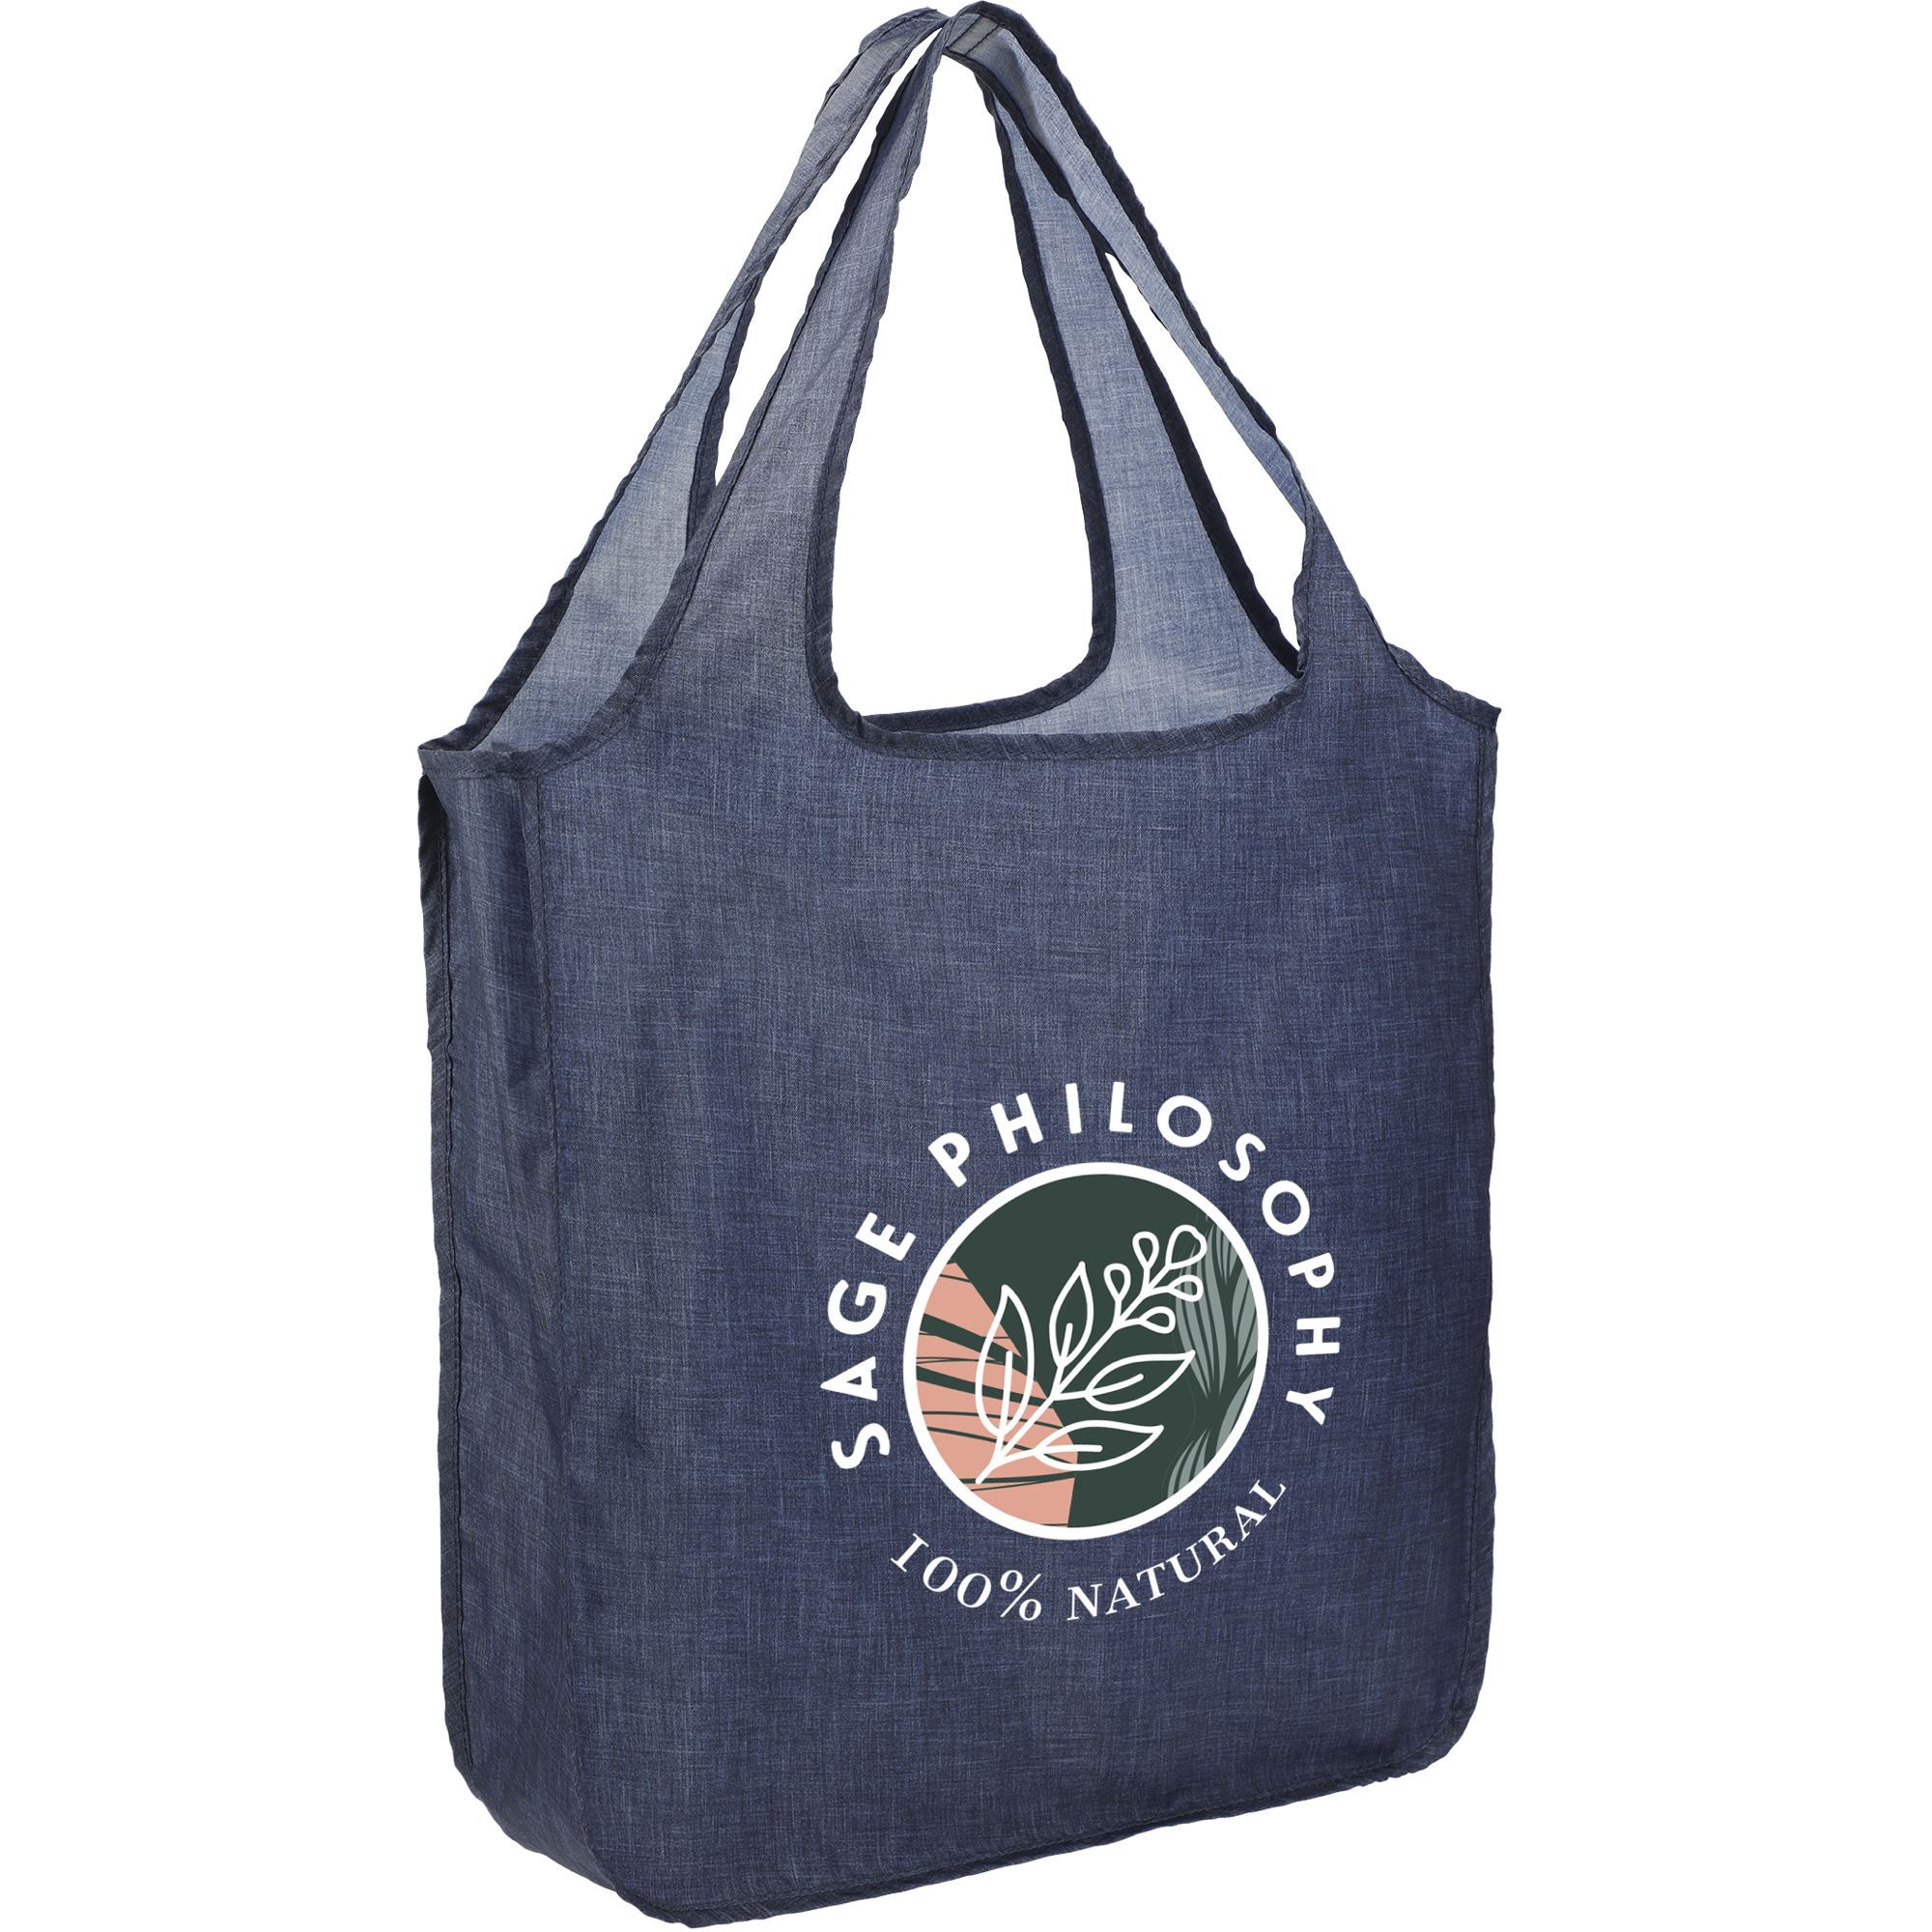 More Than Just a Bag - Creative Uses for Promotional Totes